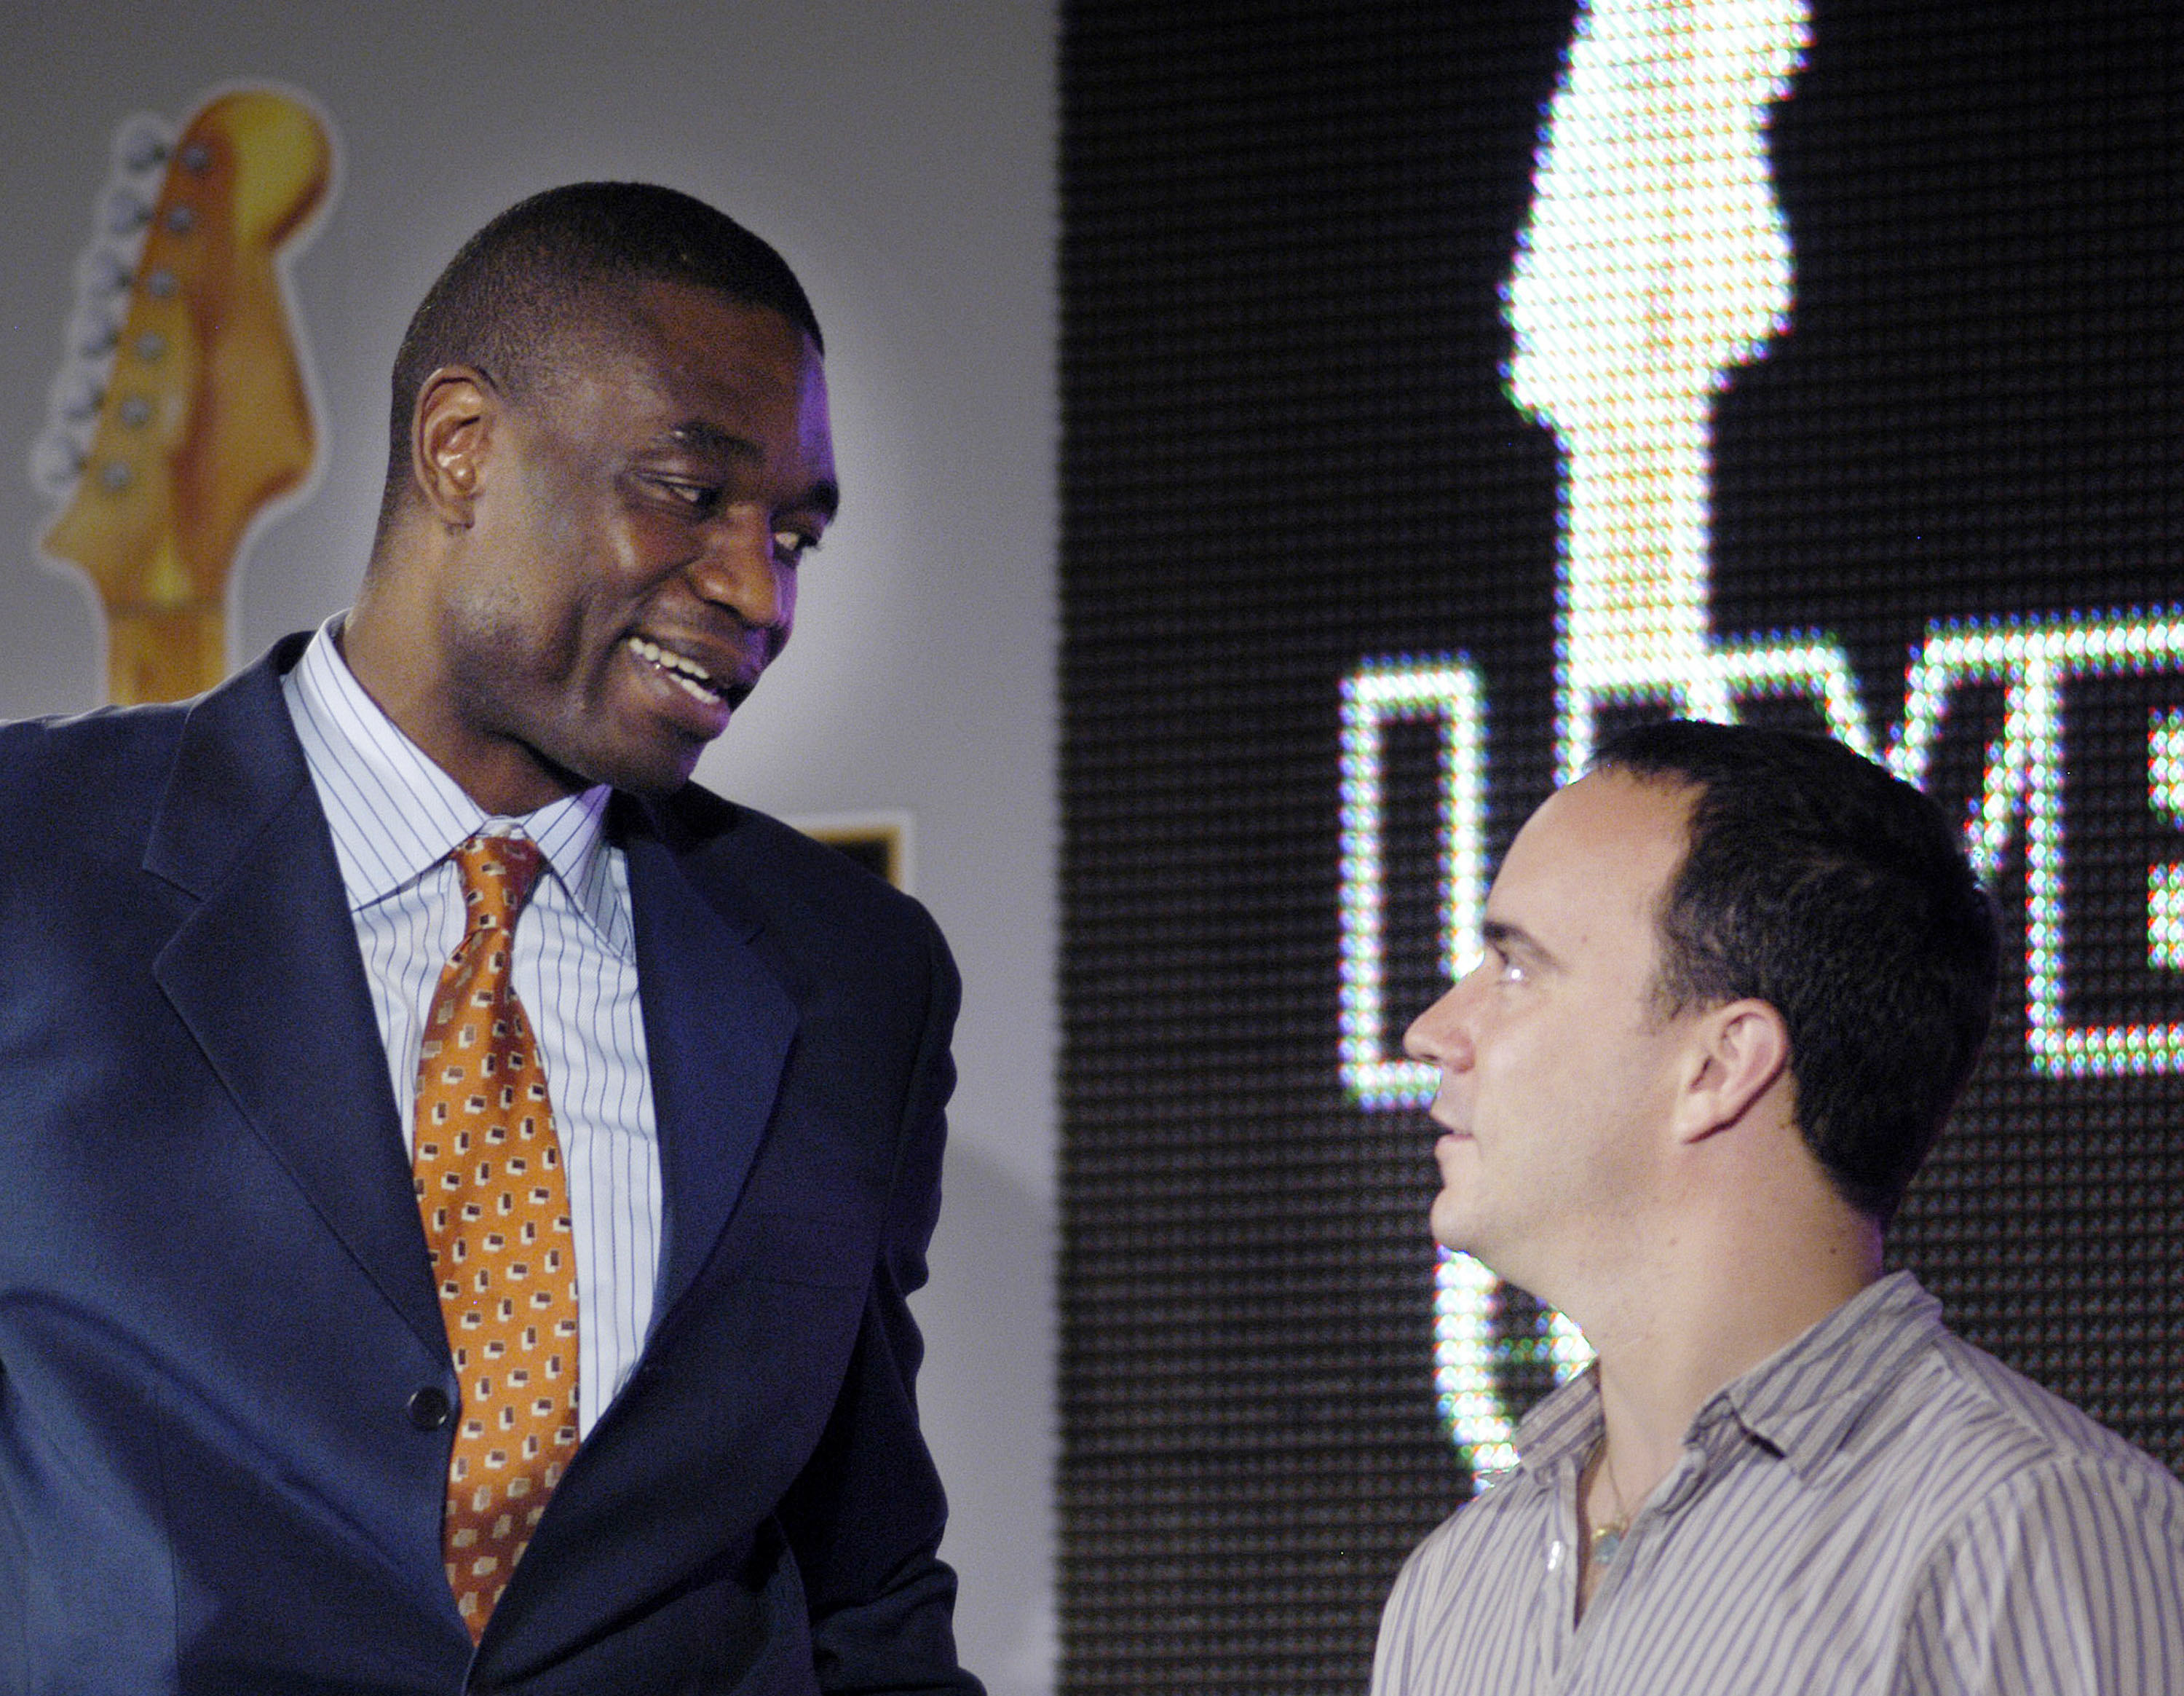 Dave and Dikembe Mutombo are having a moment.